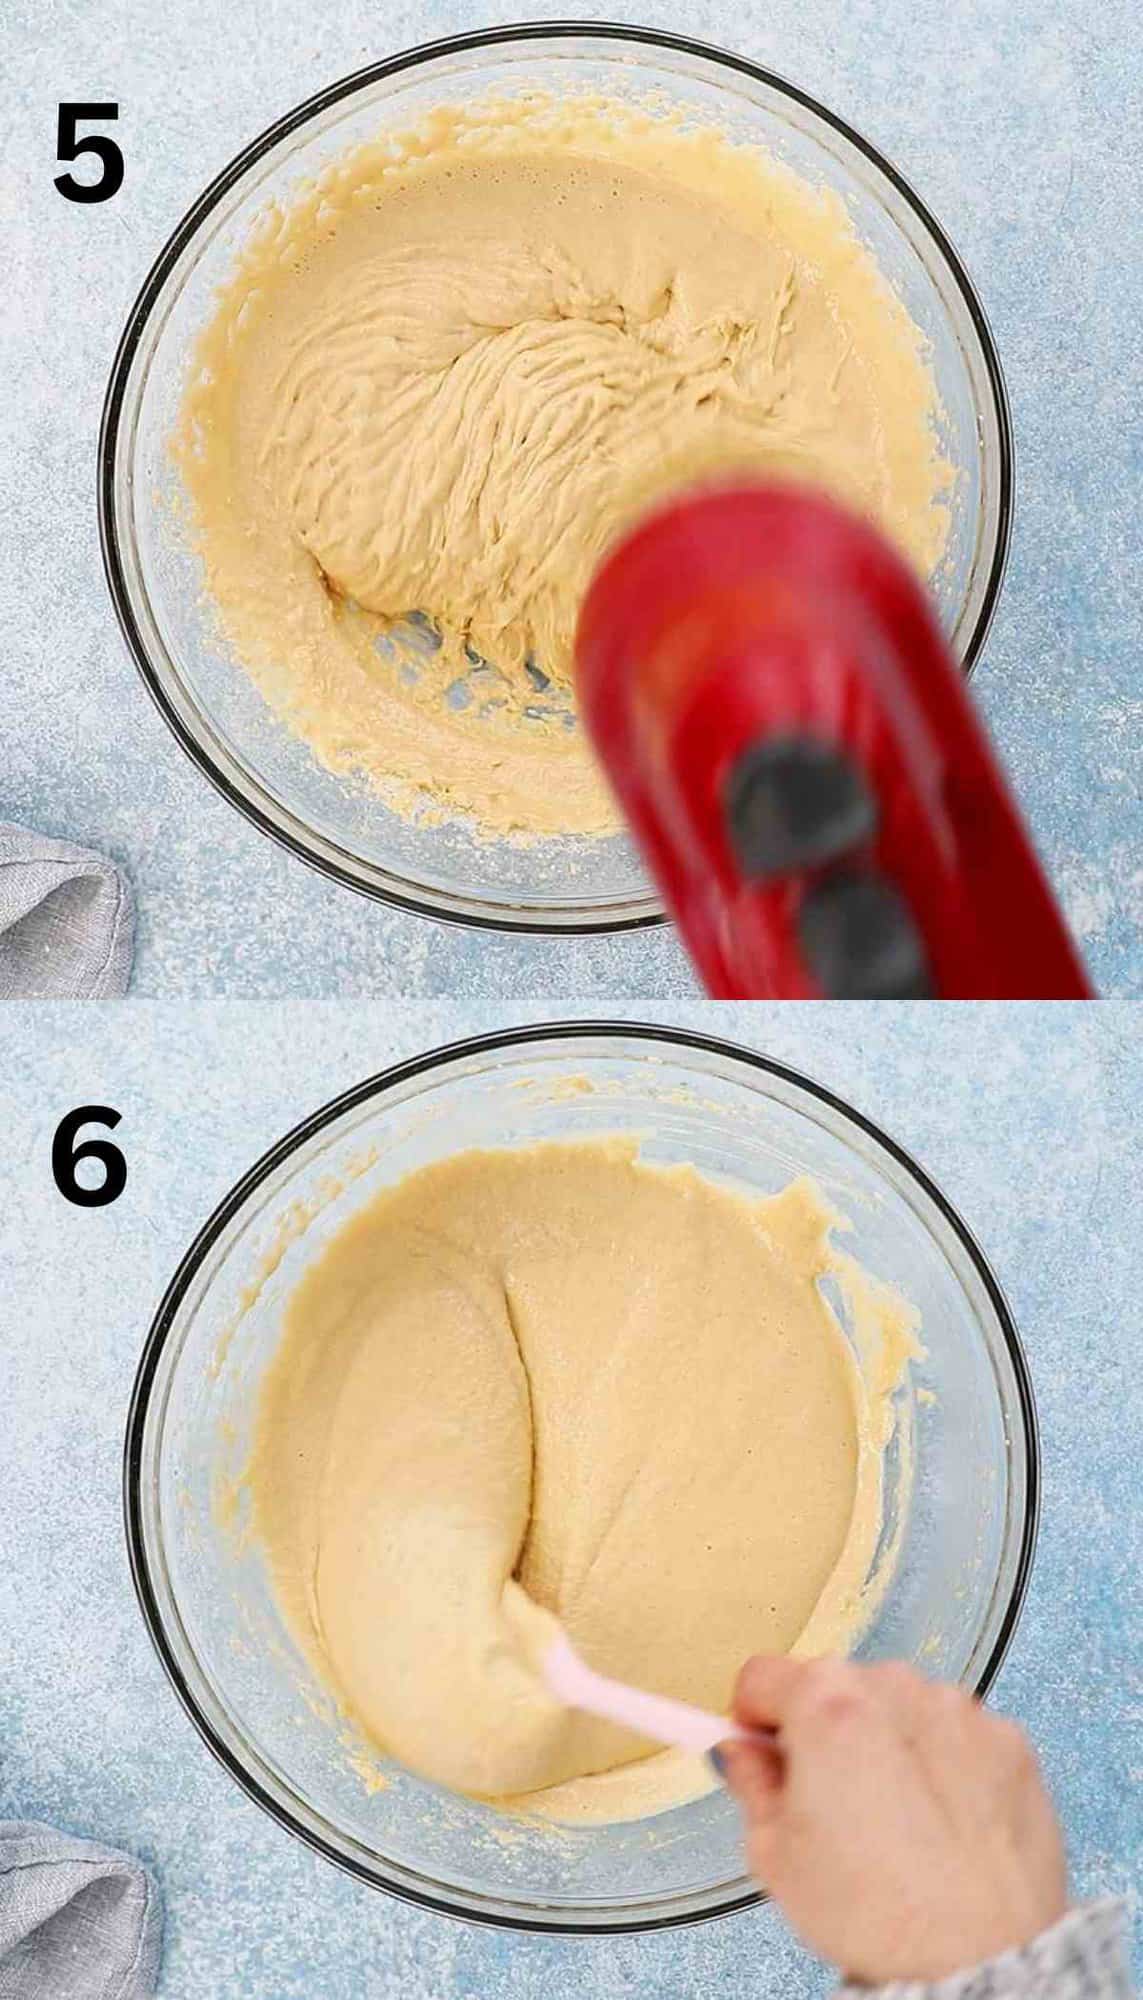 beating cake batter in a glass bowl using a red mixer.